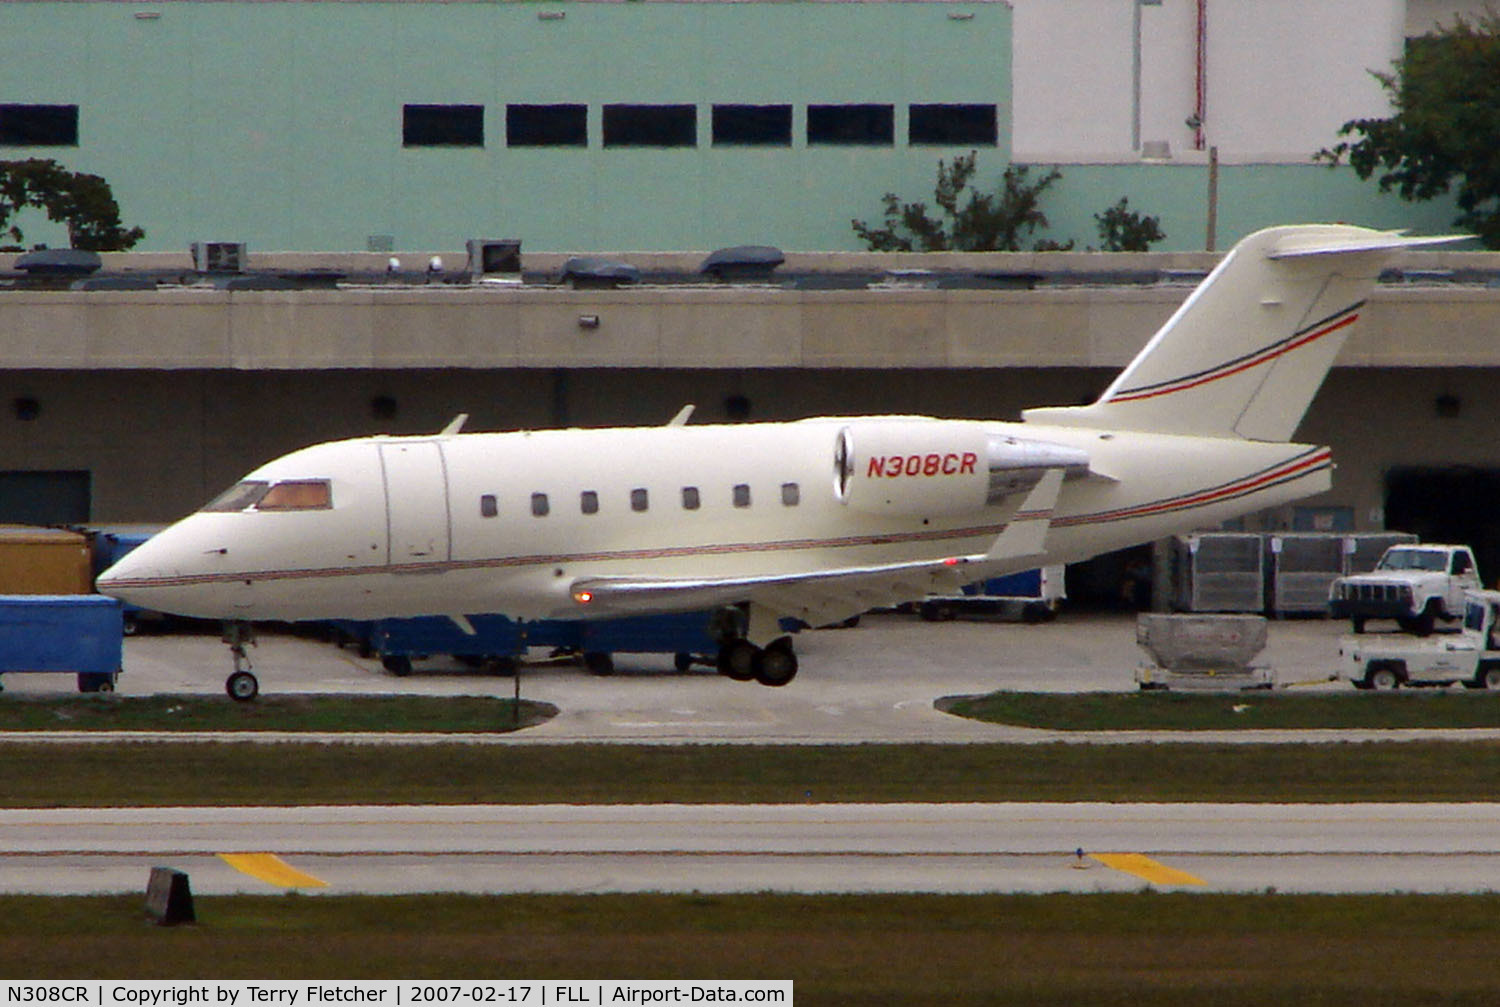 N308CR, 1991 Canadair Challenger 601-3A (CL-600-2B16) C/N 5092, Challenger landing at FLL in Feb 2008